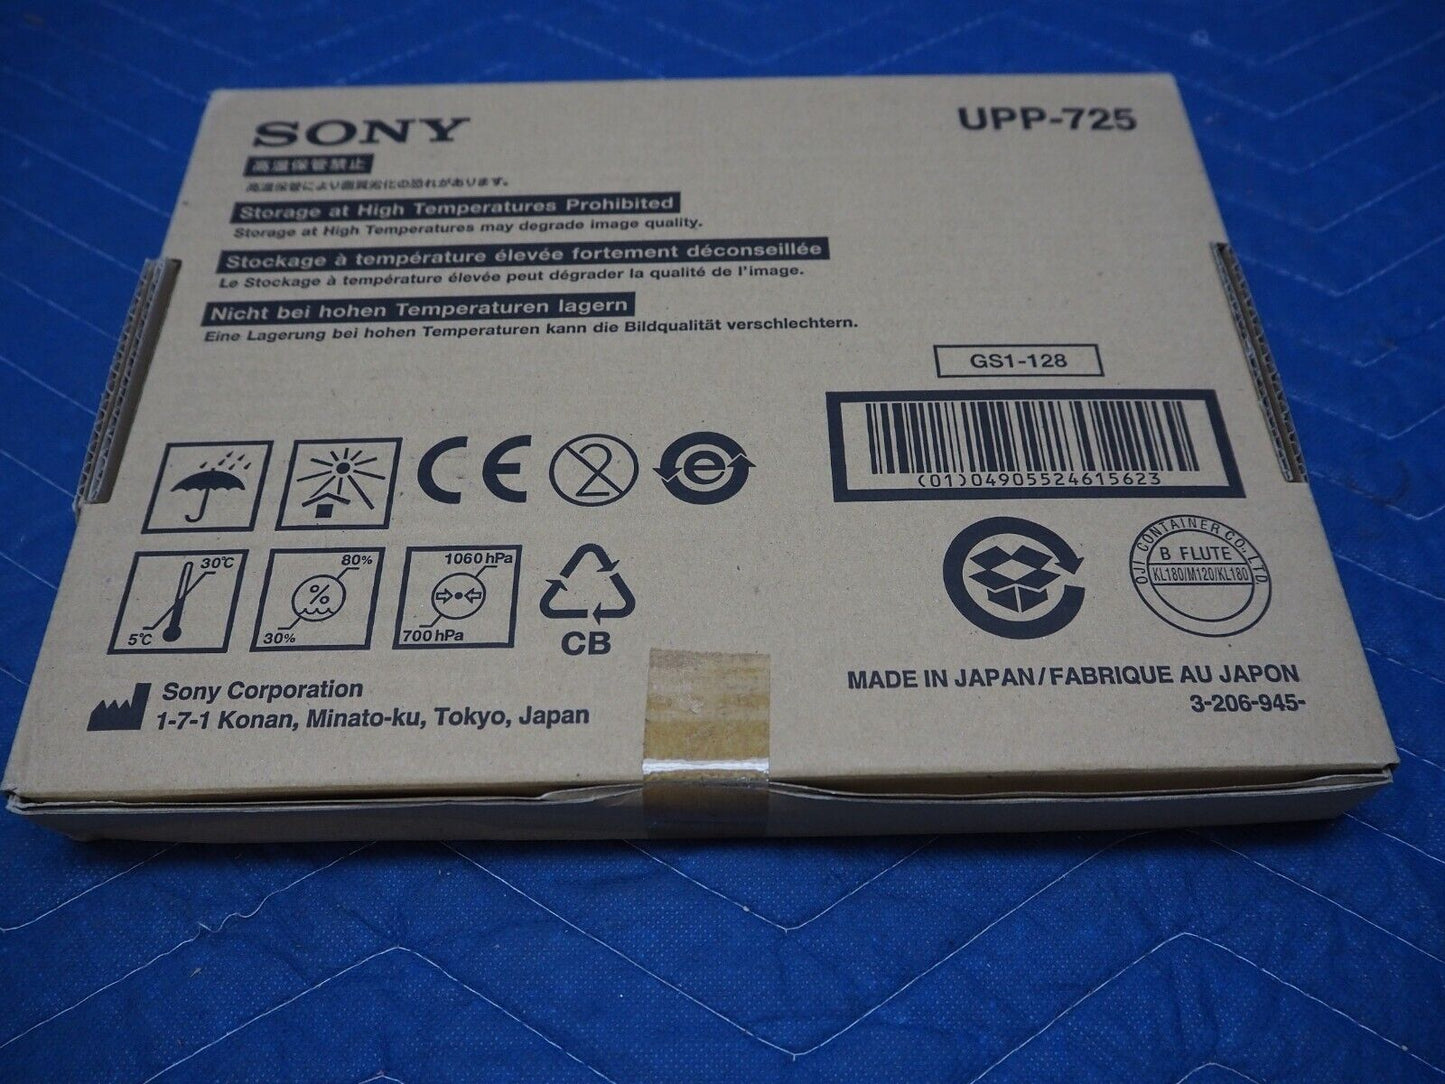 1x Case / 5x Boxes / 500 Sheets Sony UPP-725 Thermal Paper for UP-D74XRD UP-D72XR